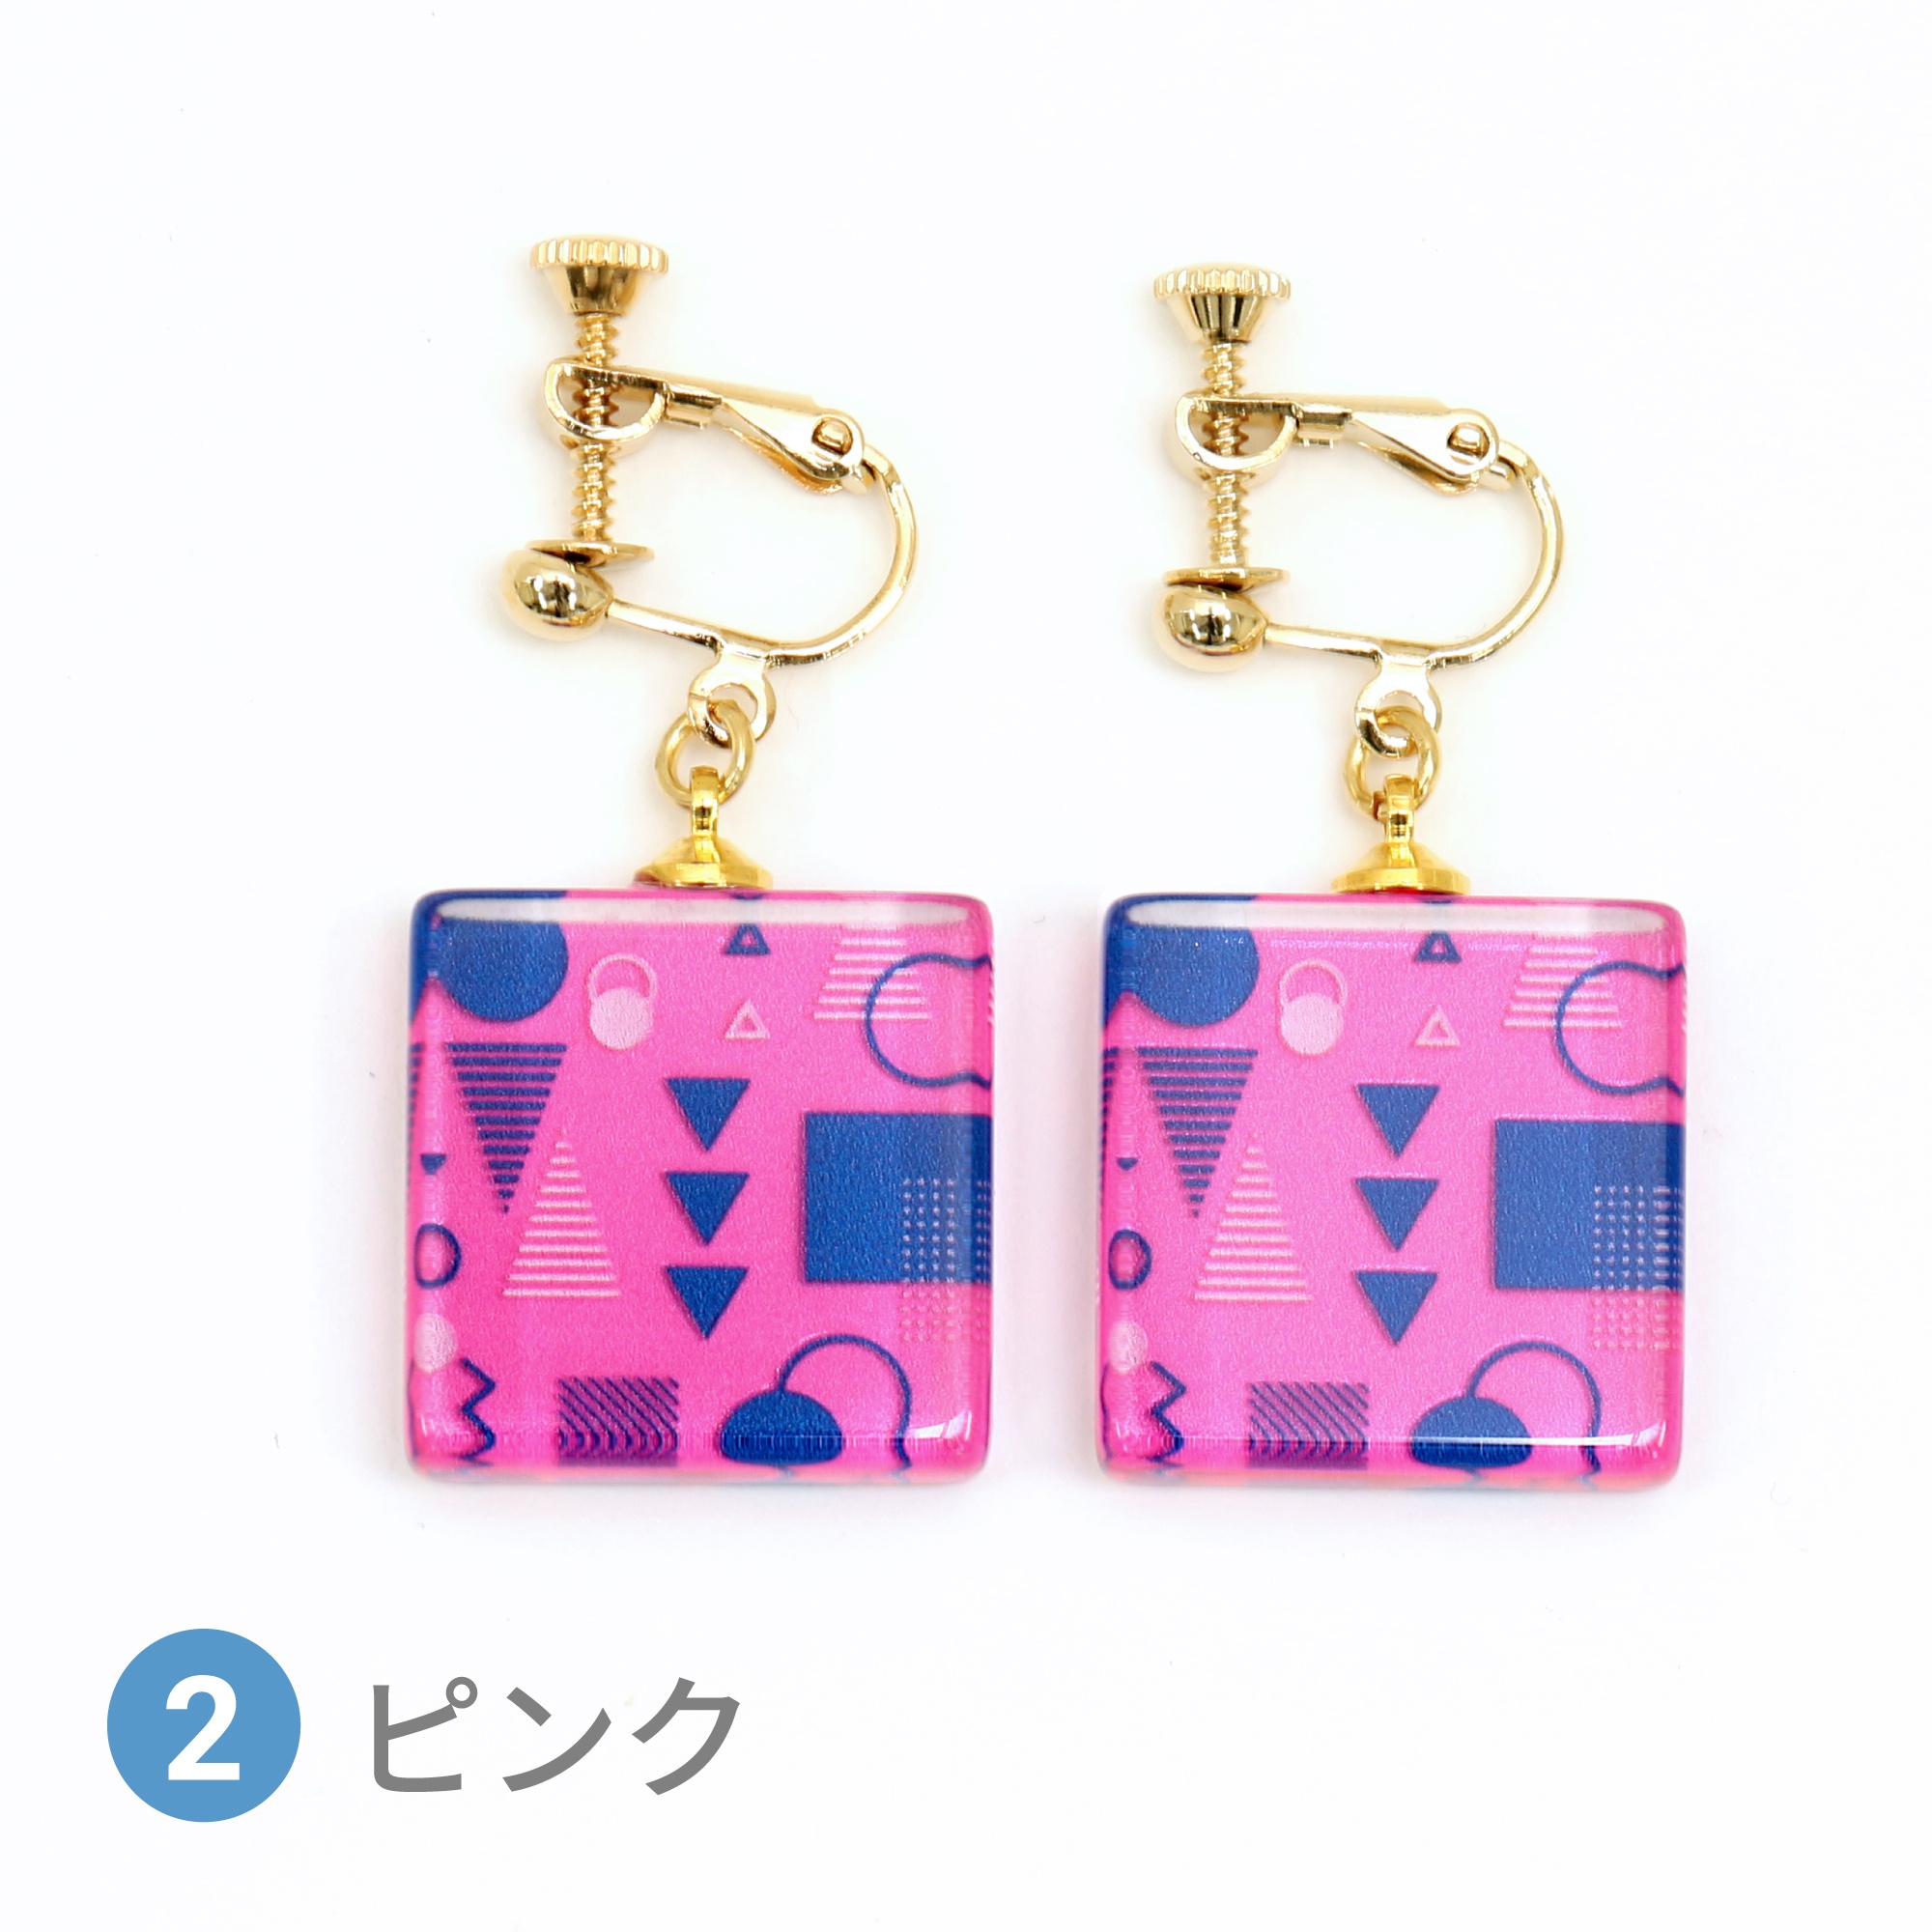 Glass accessories Earring GEOMETRIC pink square shape